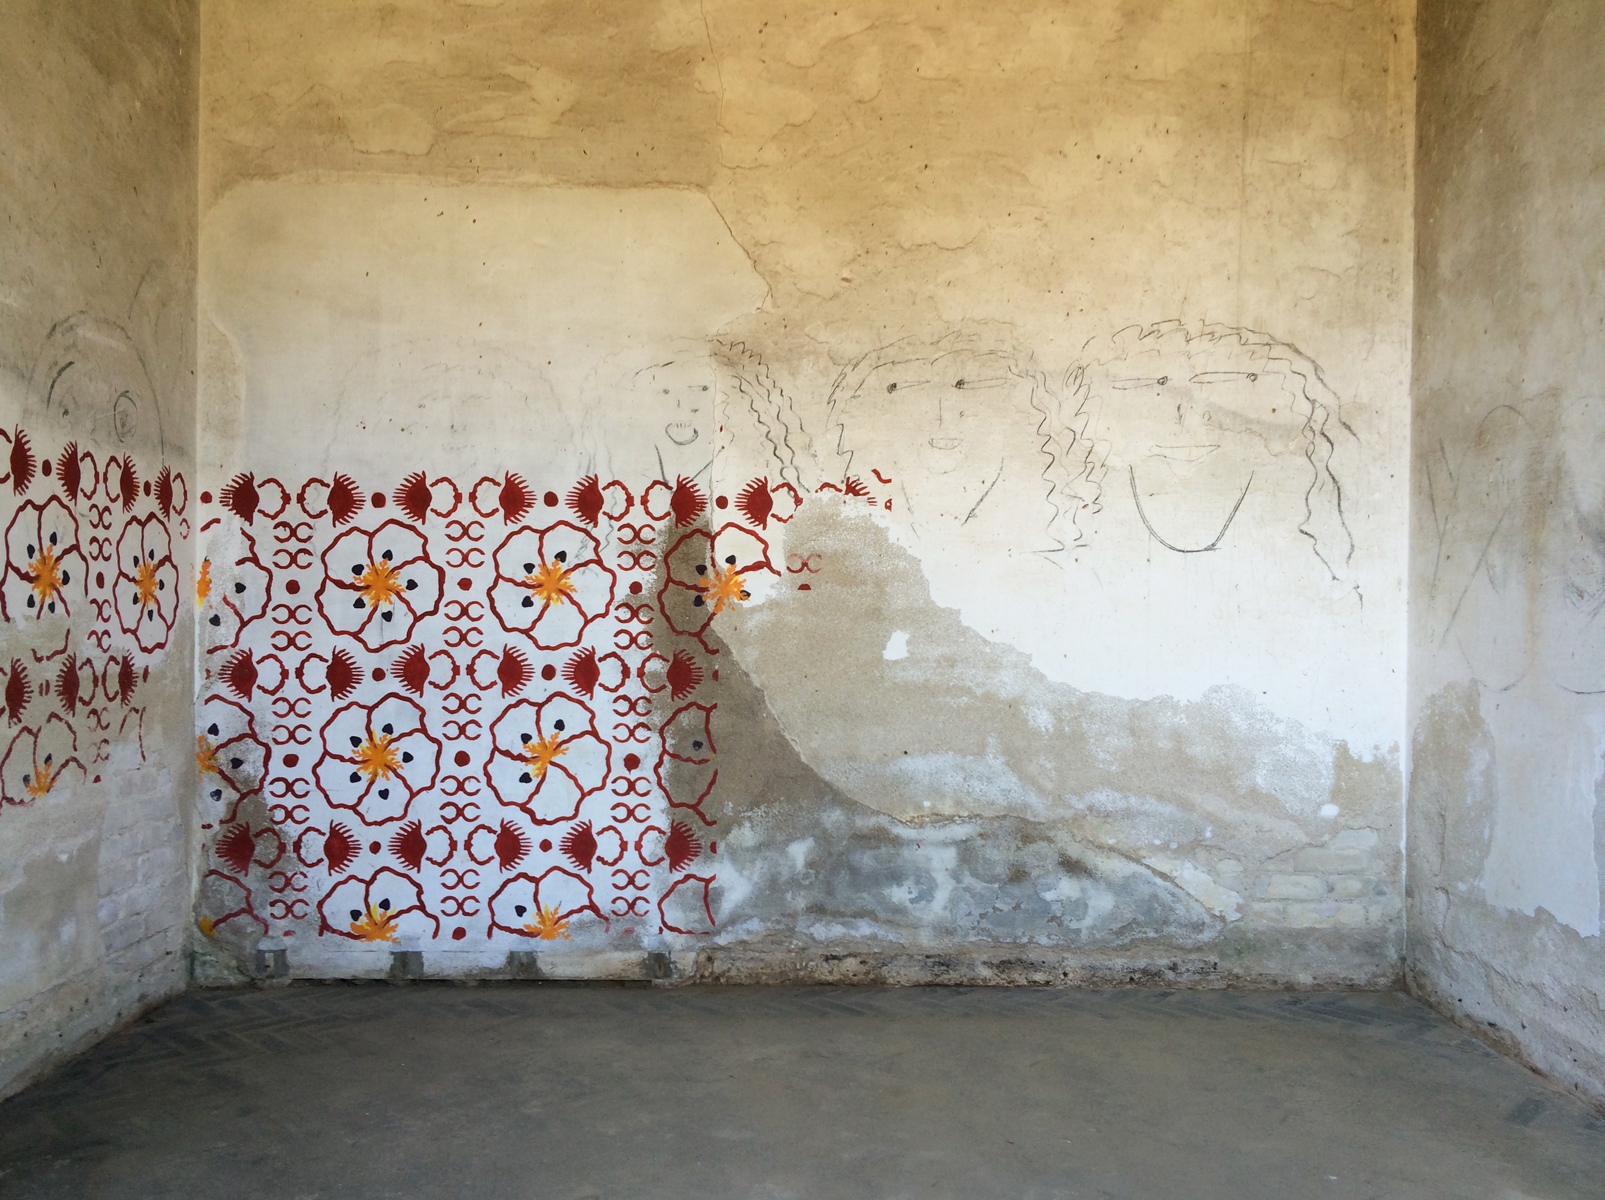 An empty rustic whitewashed room with a floral mural and charcoal-drawn faces.